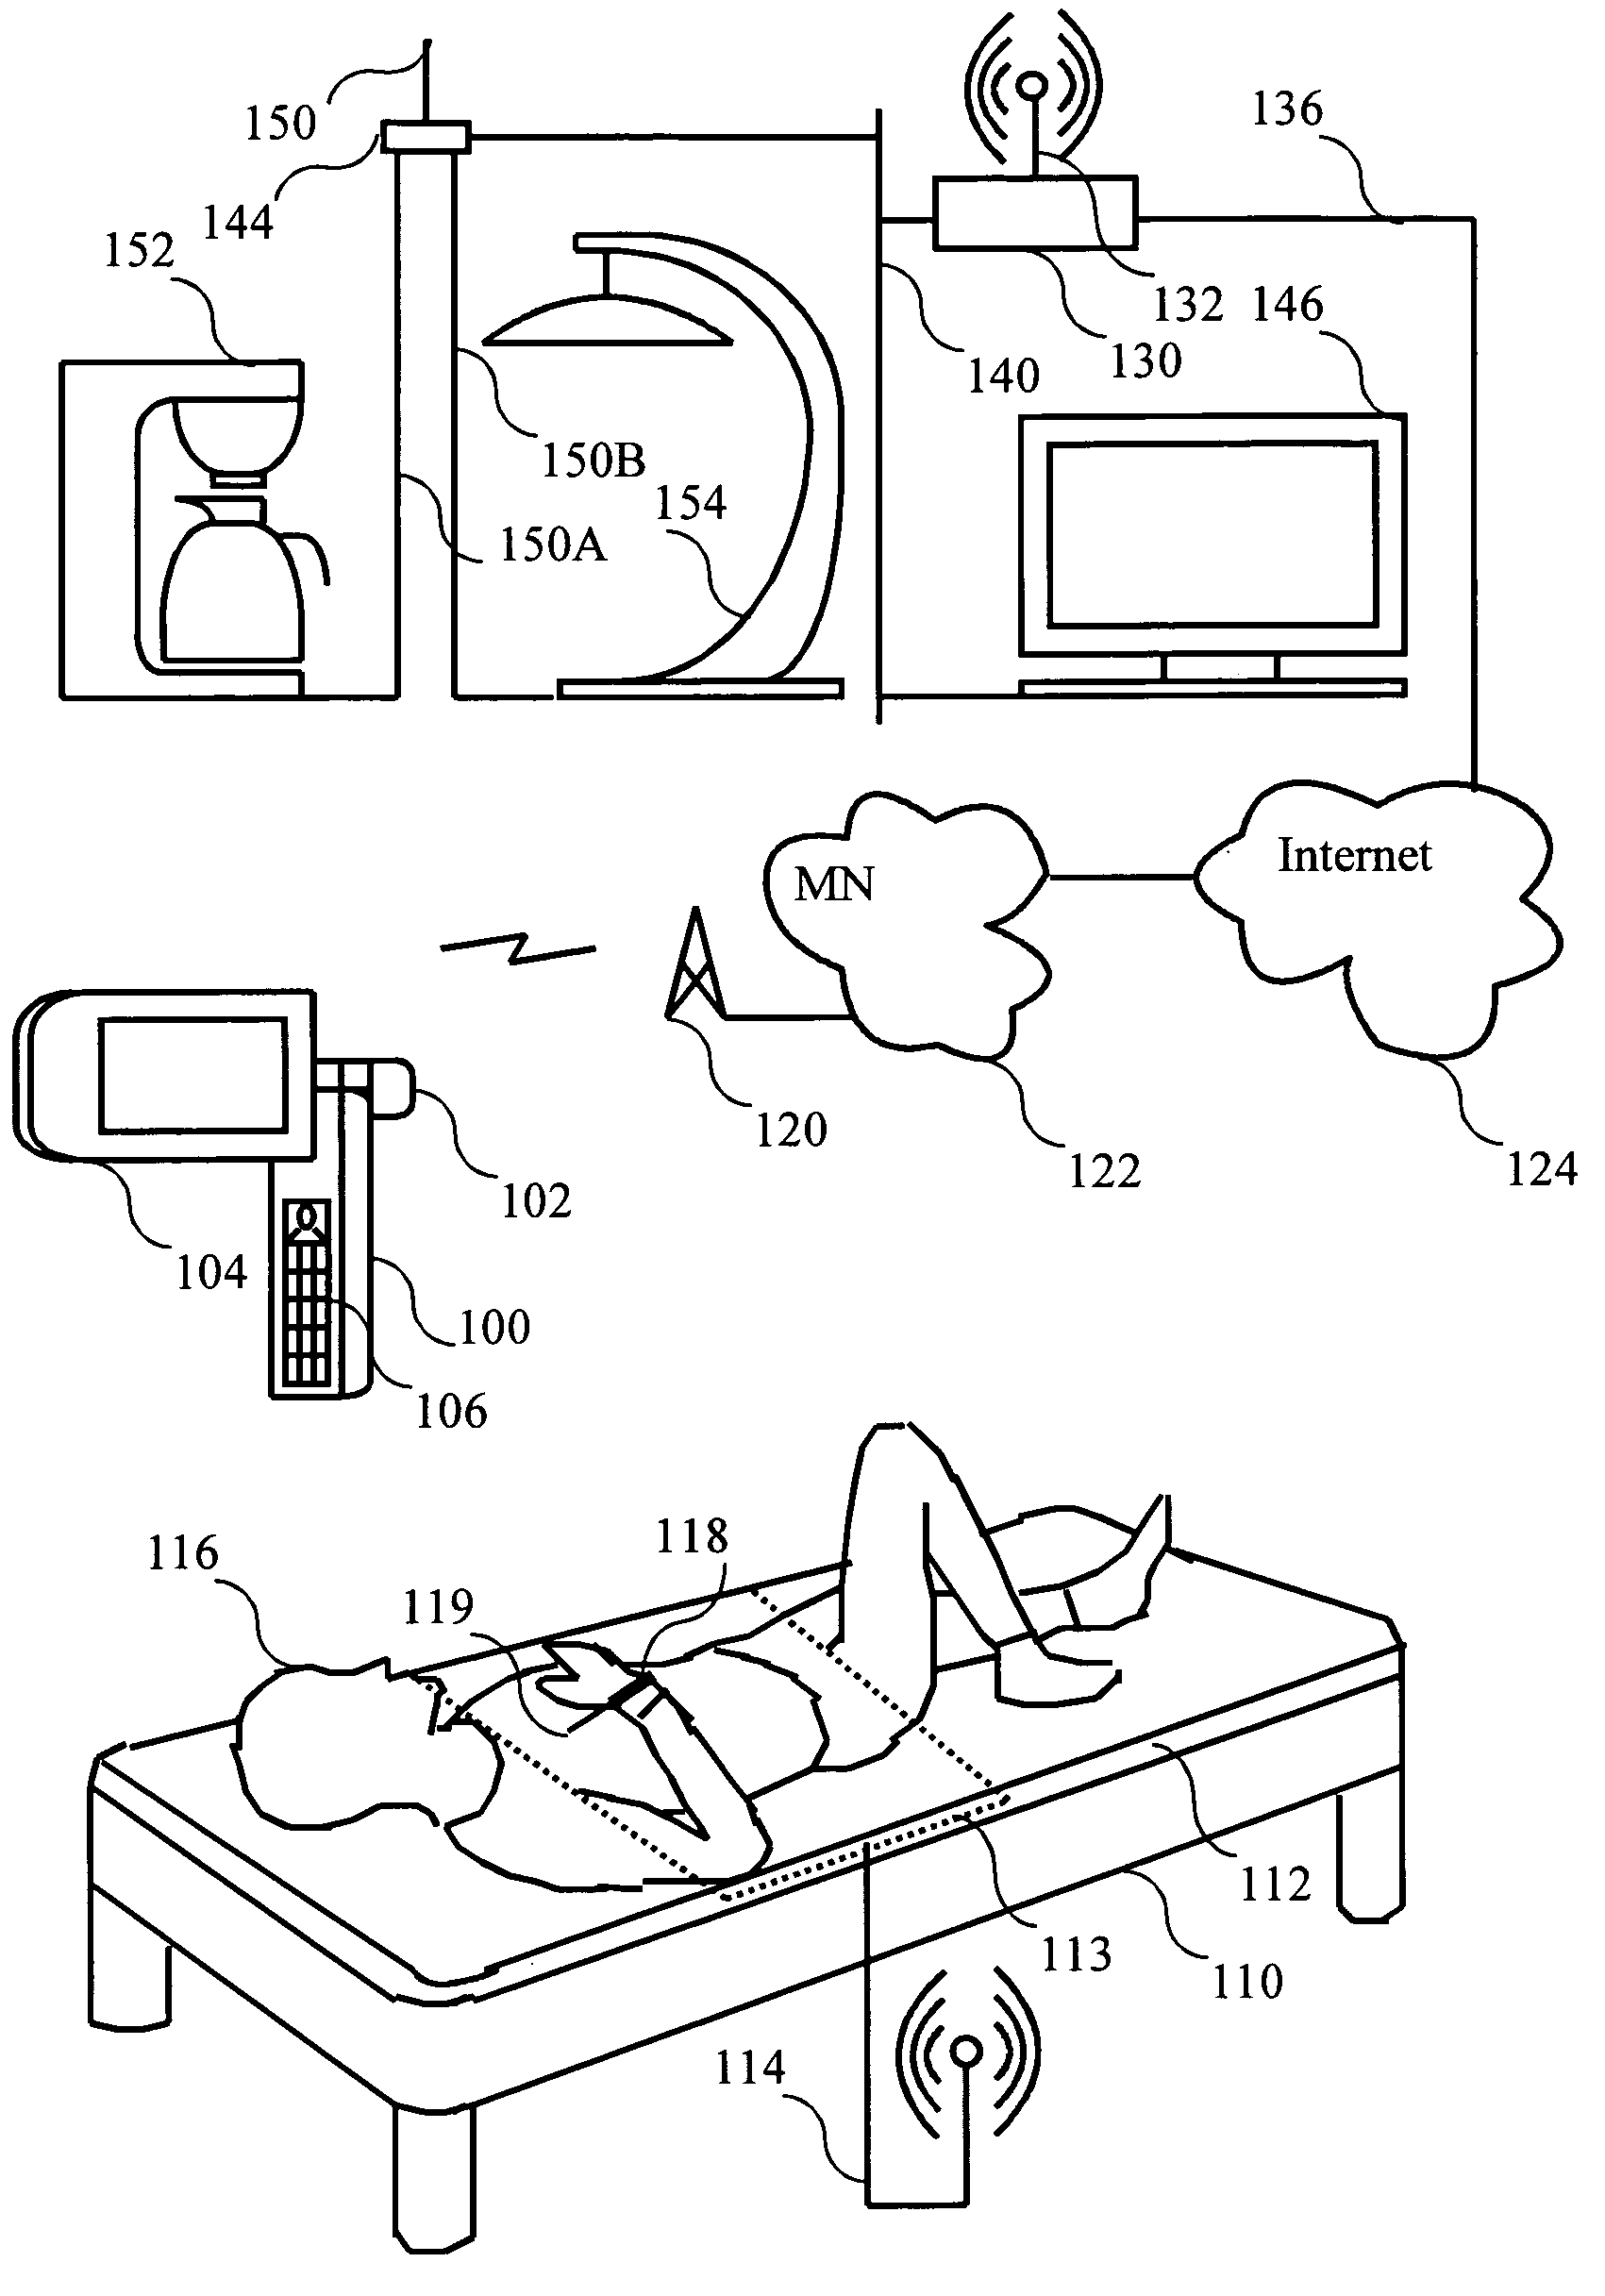 Method for the monitoring of sleep using an electronic device